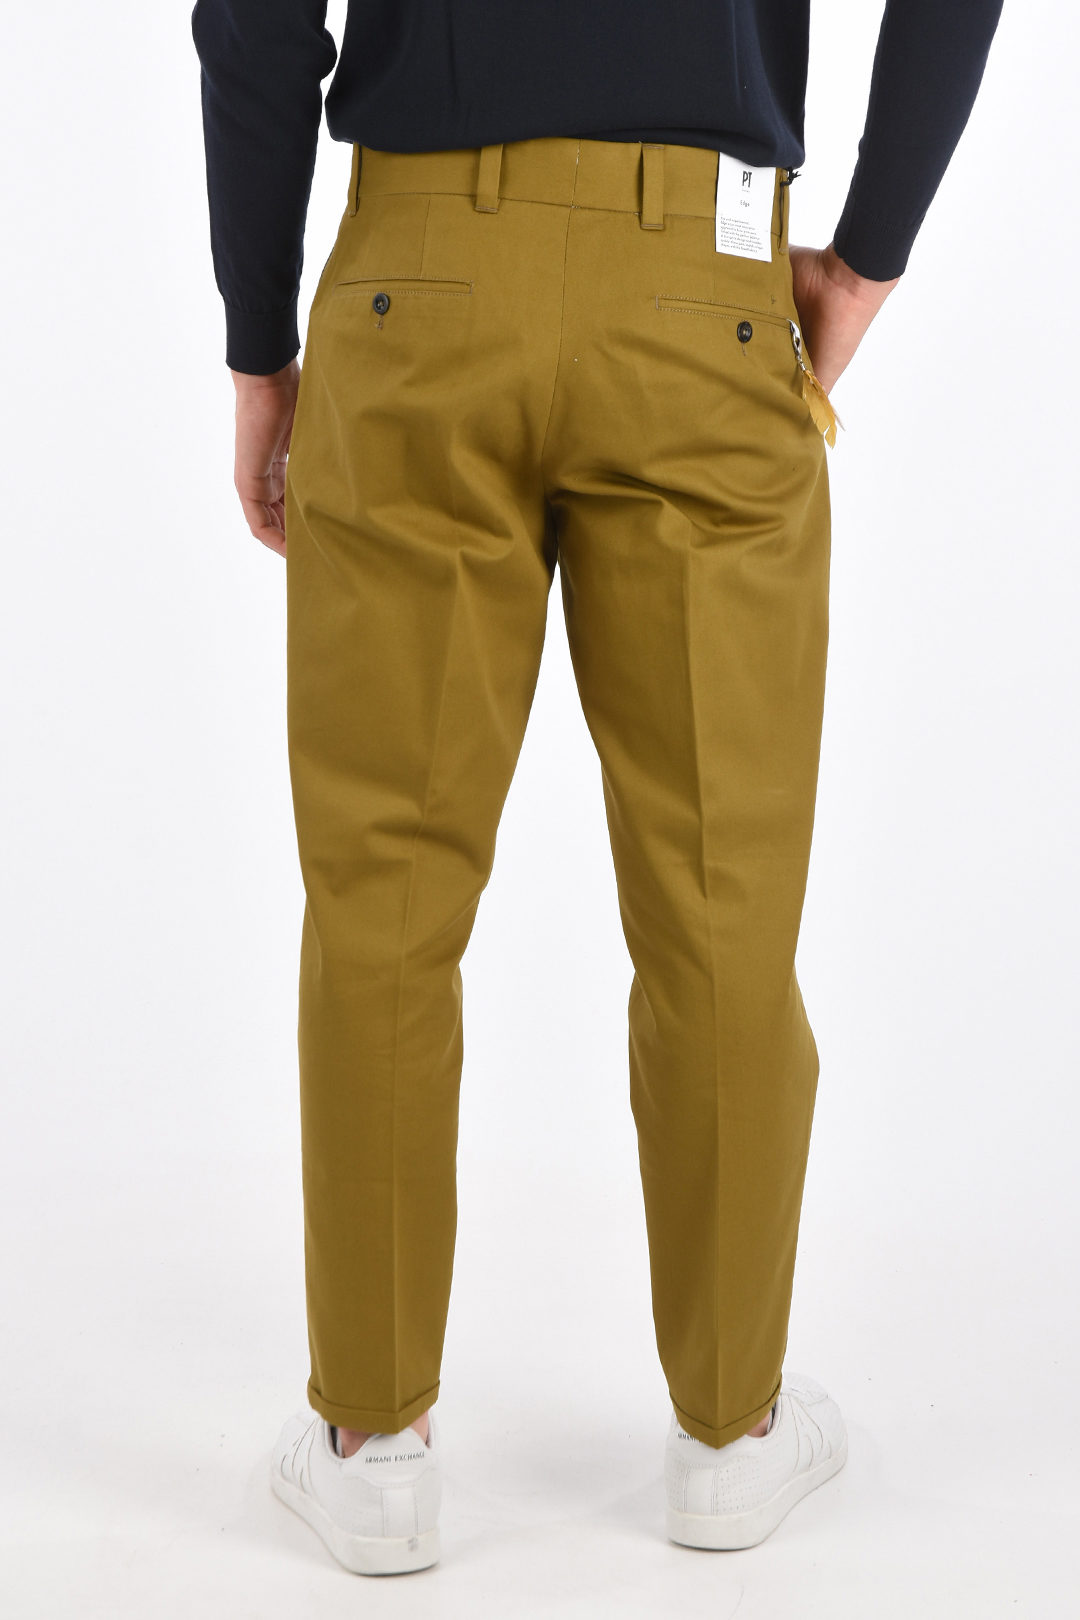 PT01 single pleat cuffed hem CINQUE trousers chinos pants men - Glamood  Outlet